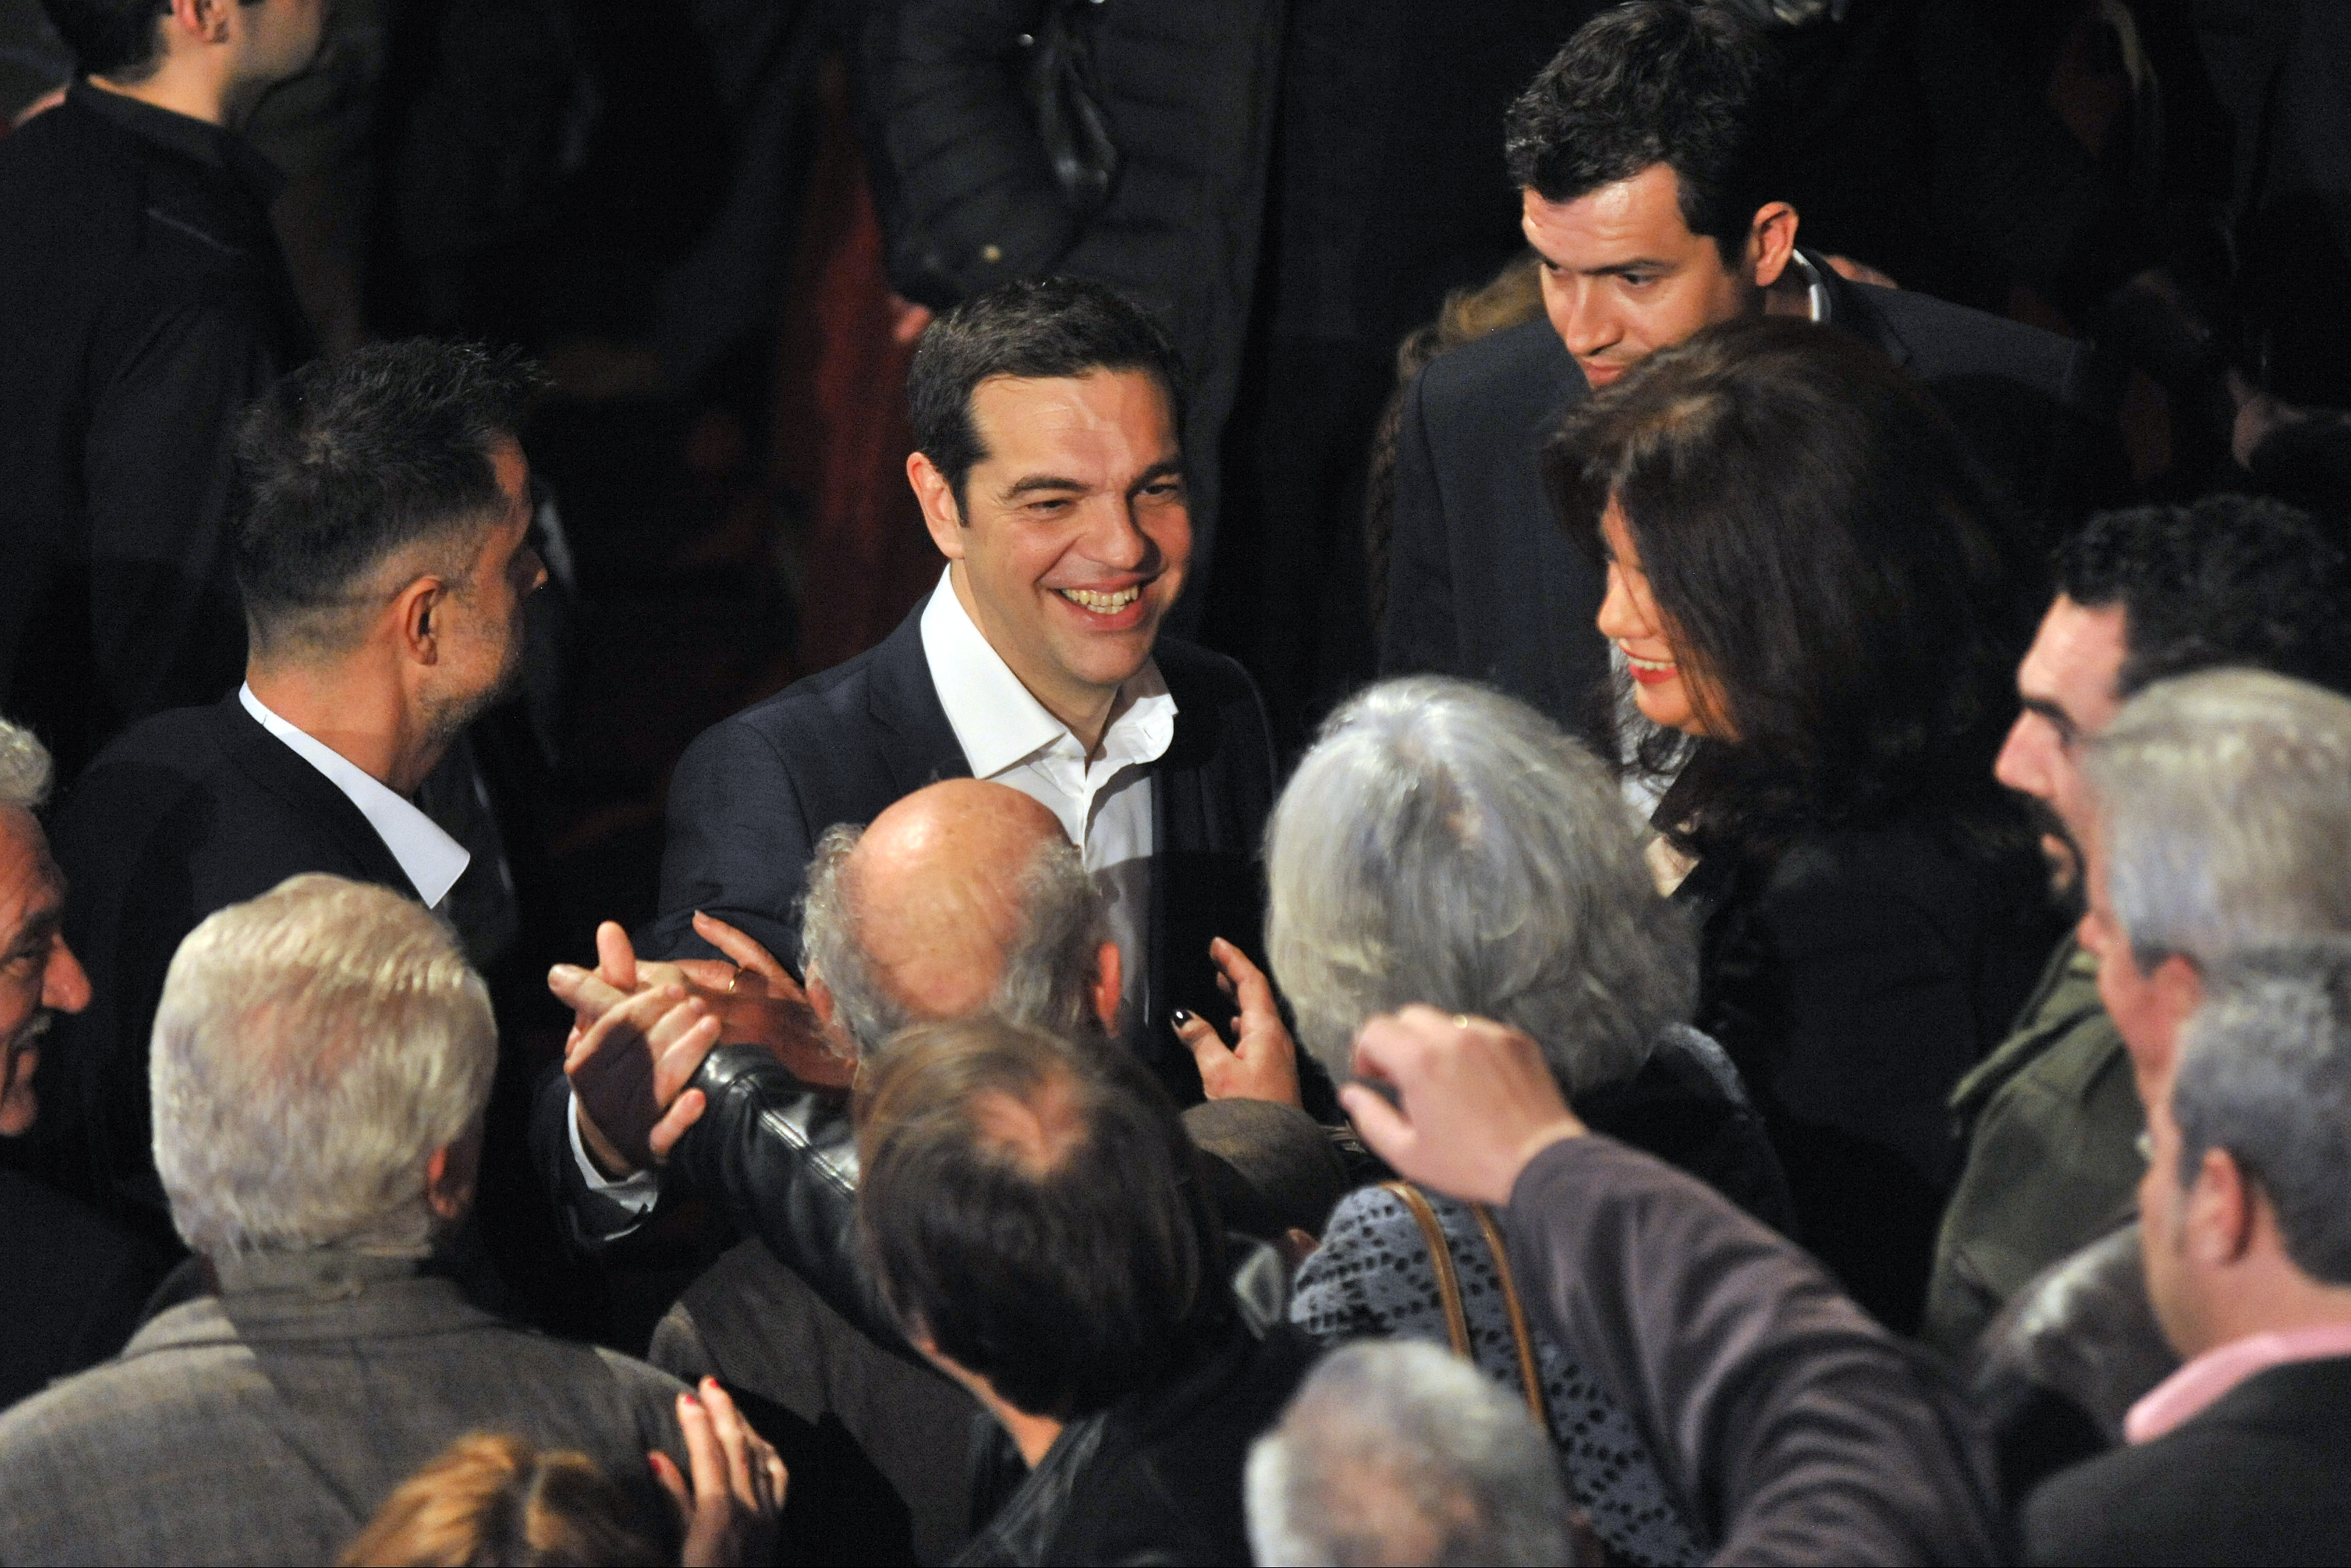 Tsipras: There can be no patriotism with kickbacks, corruption